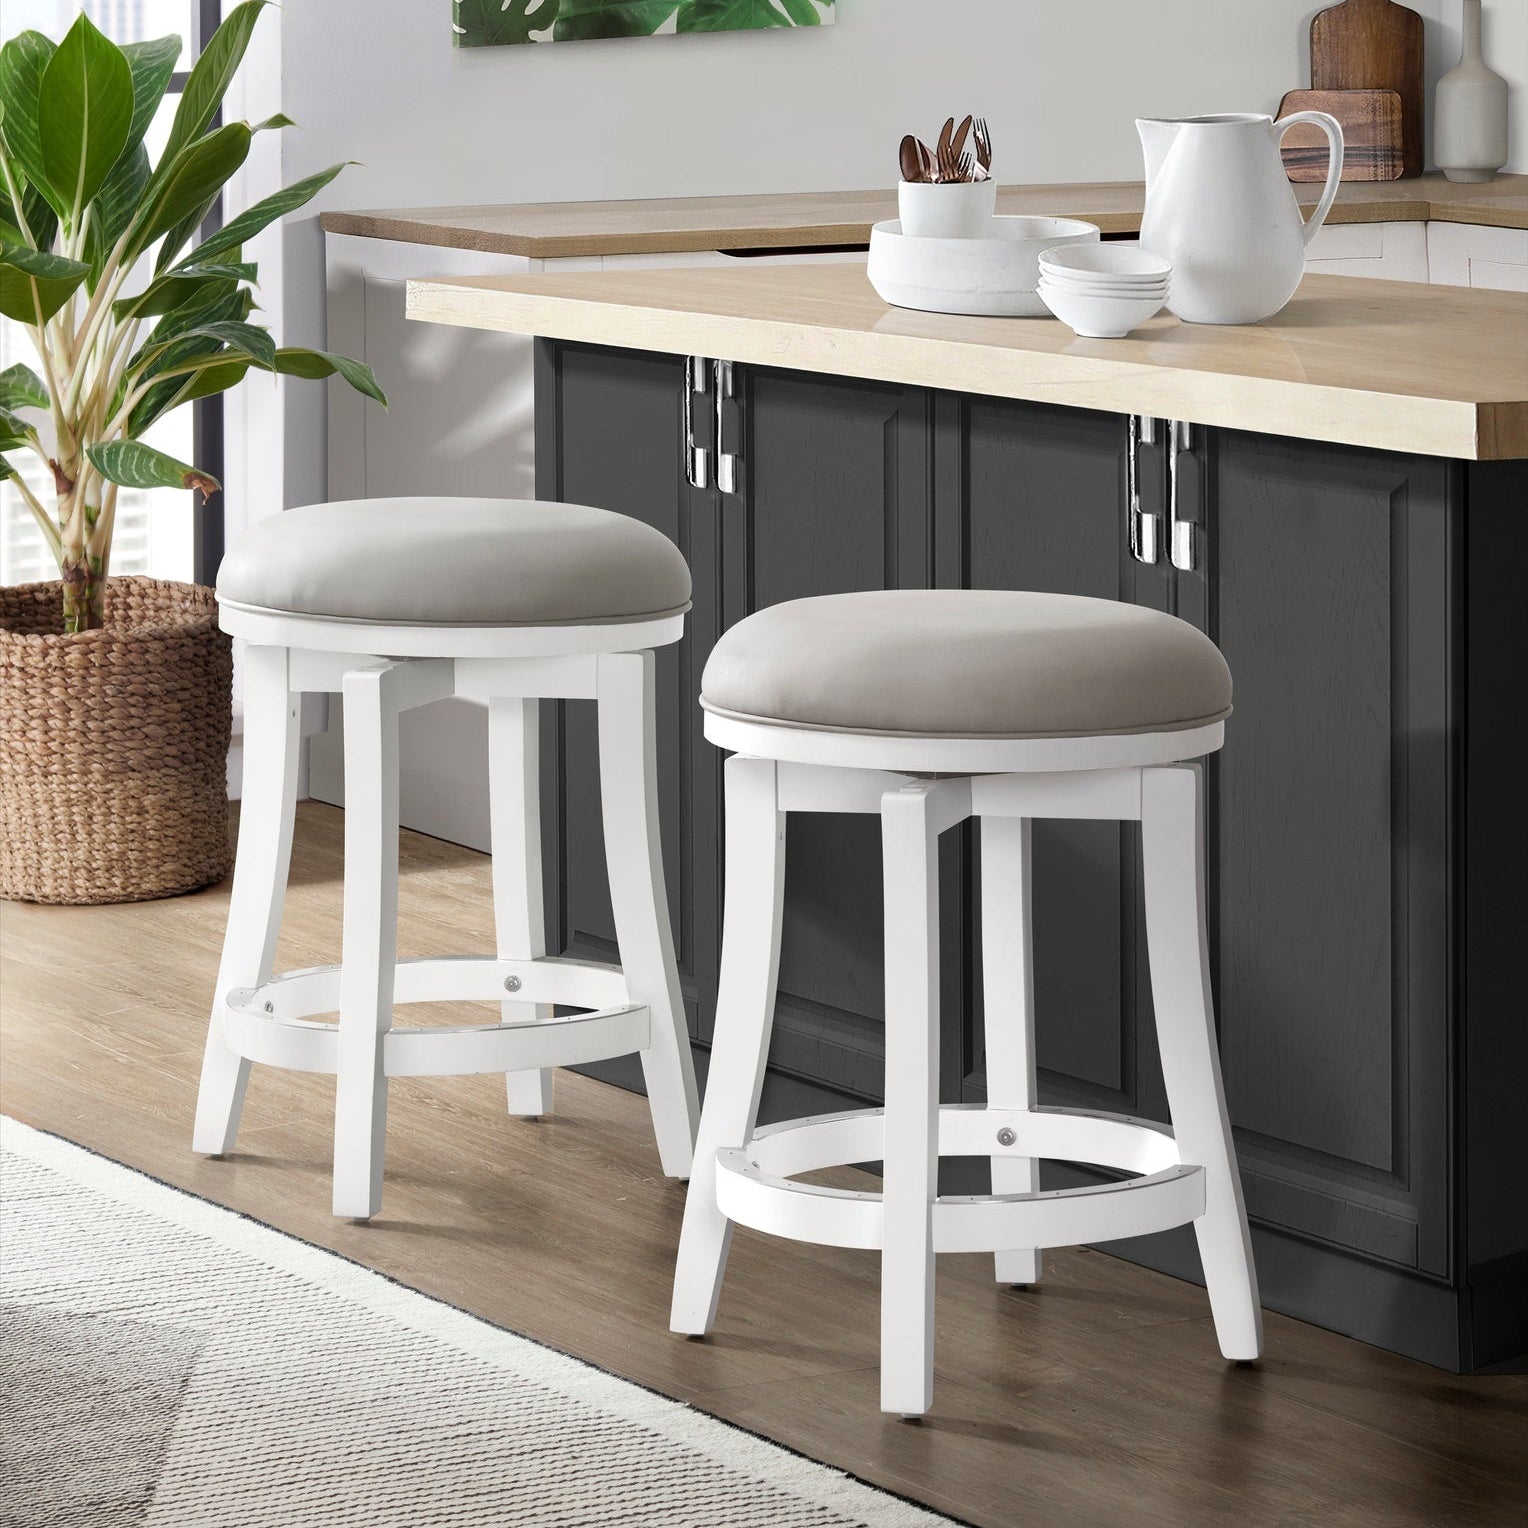 Ellie-White-Counter-Height-Stool,-Set-of-2-Counter-Stool